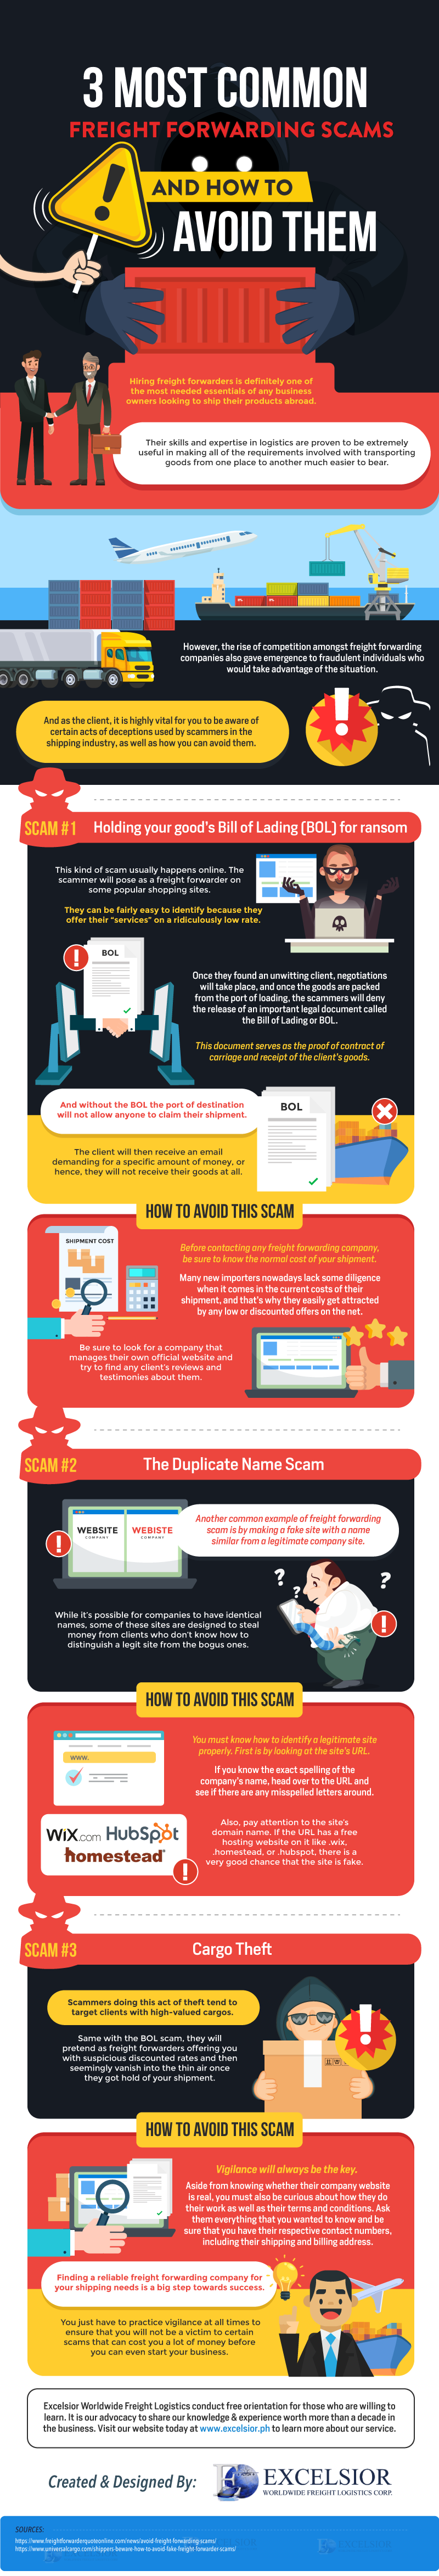 3 Most Common Freight Forwarding Scams